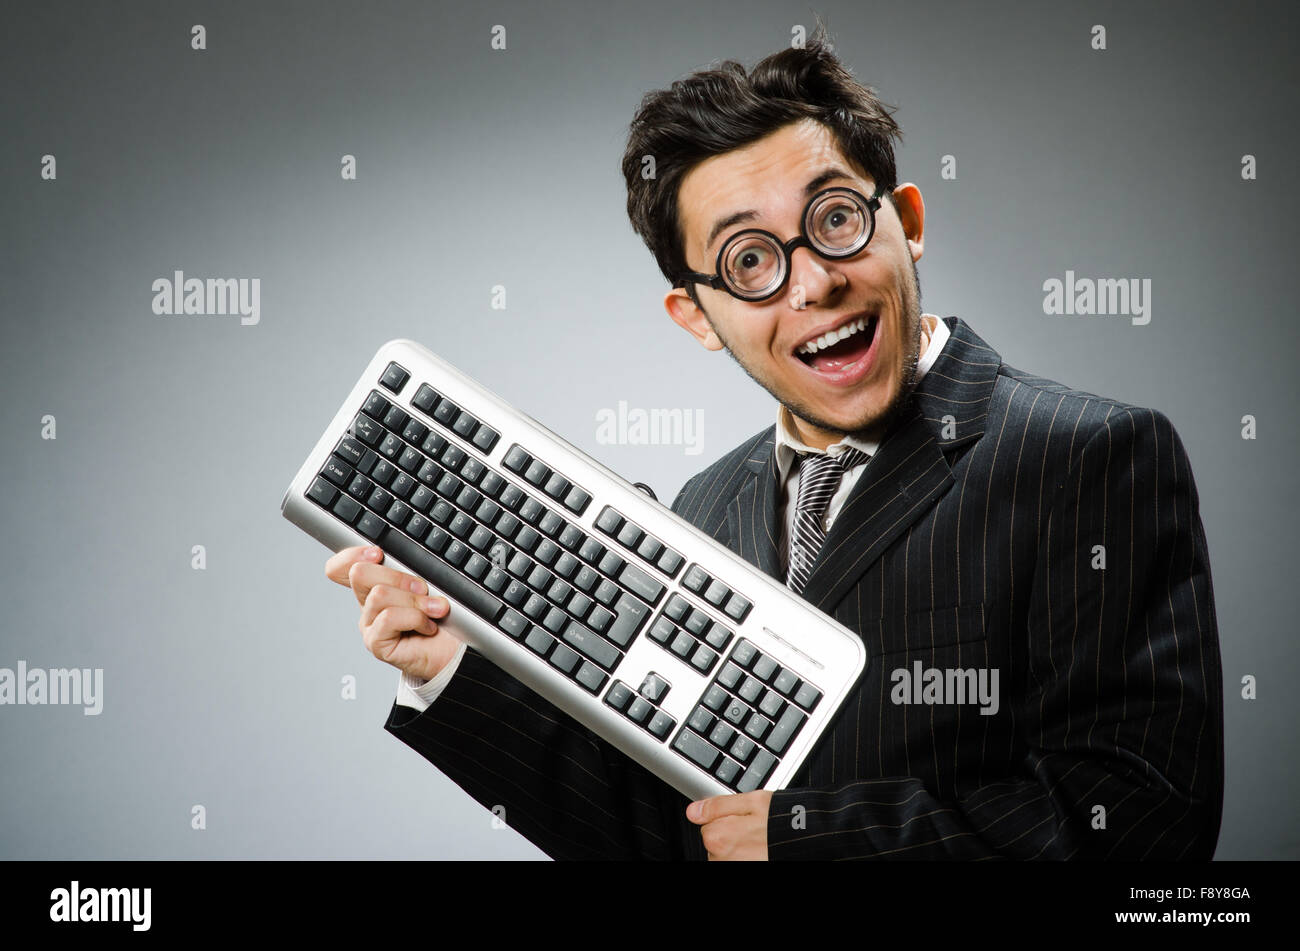 Comouter geek with computer keyboard Stock Photo